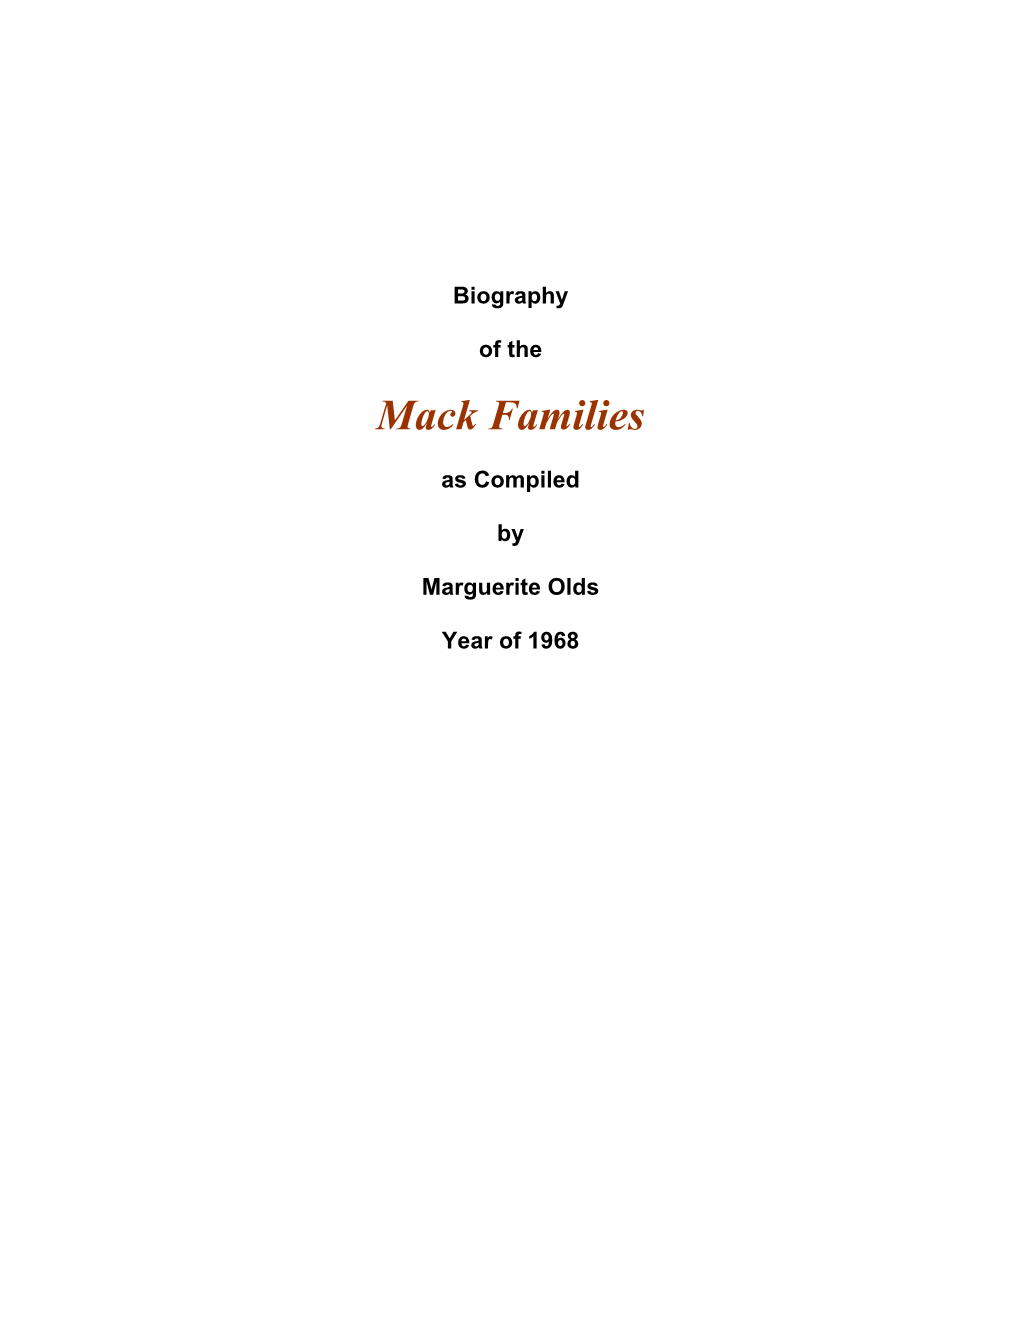 Biography of the Mack Families As Compiled by Marguerite Olds Year